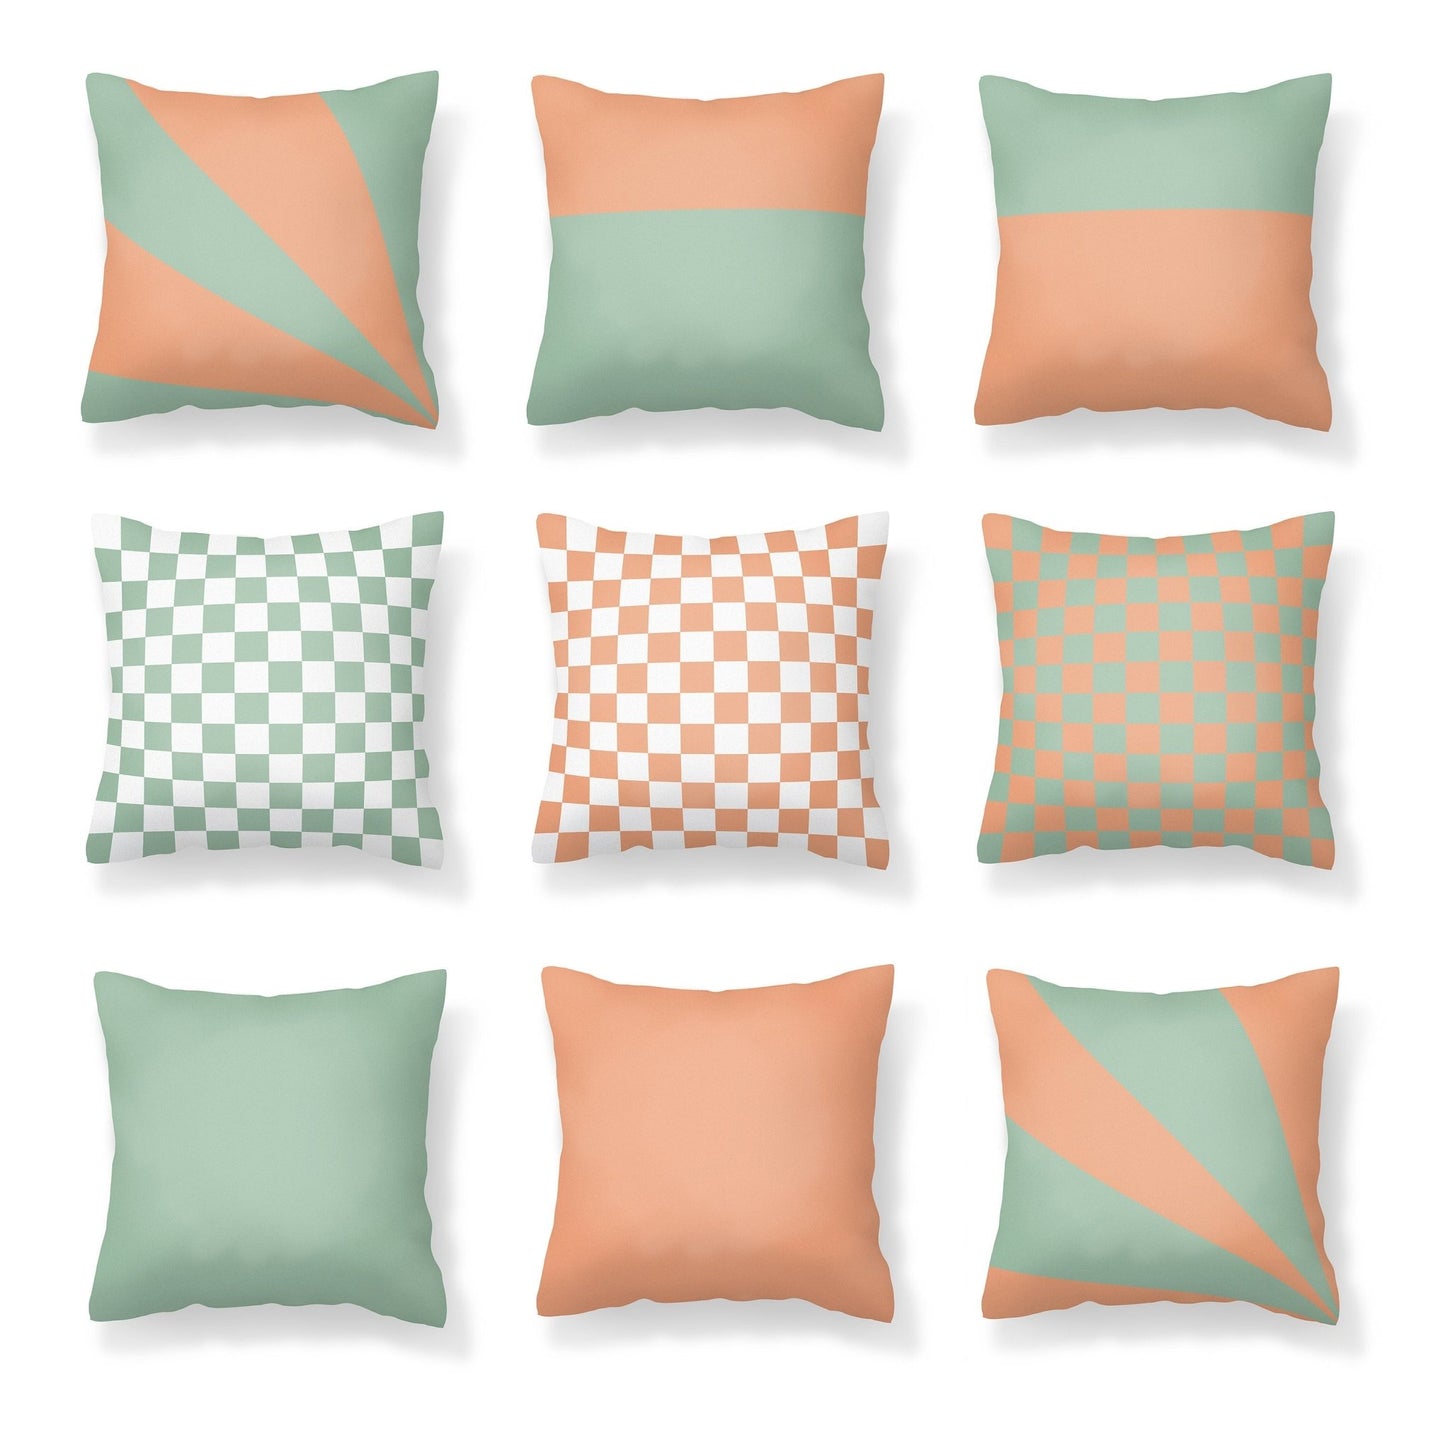 Peach Pillow Covers - Mint Green and Peach Mix and Match Pillow Cases - Throw Pillows